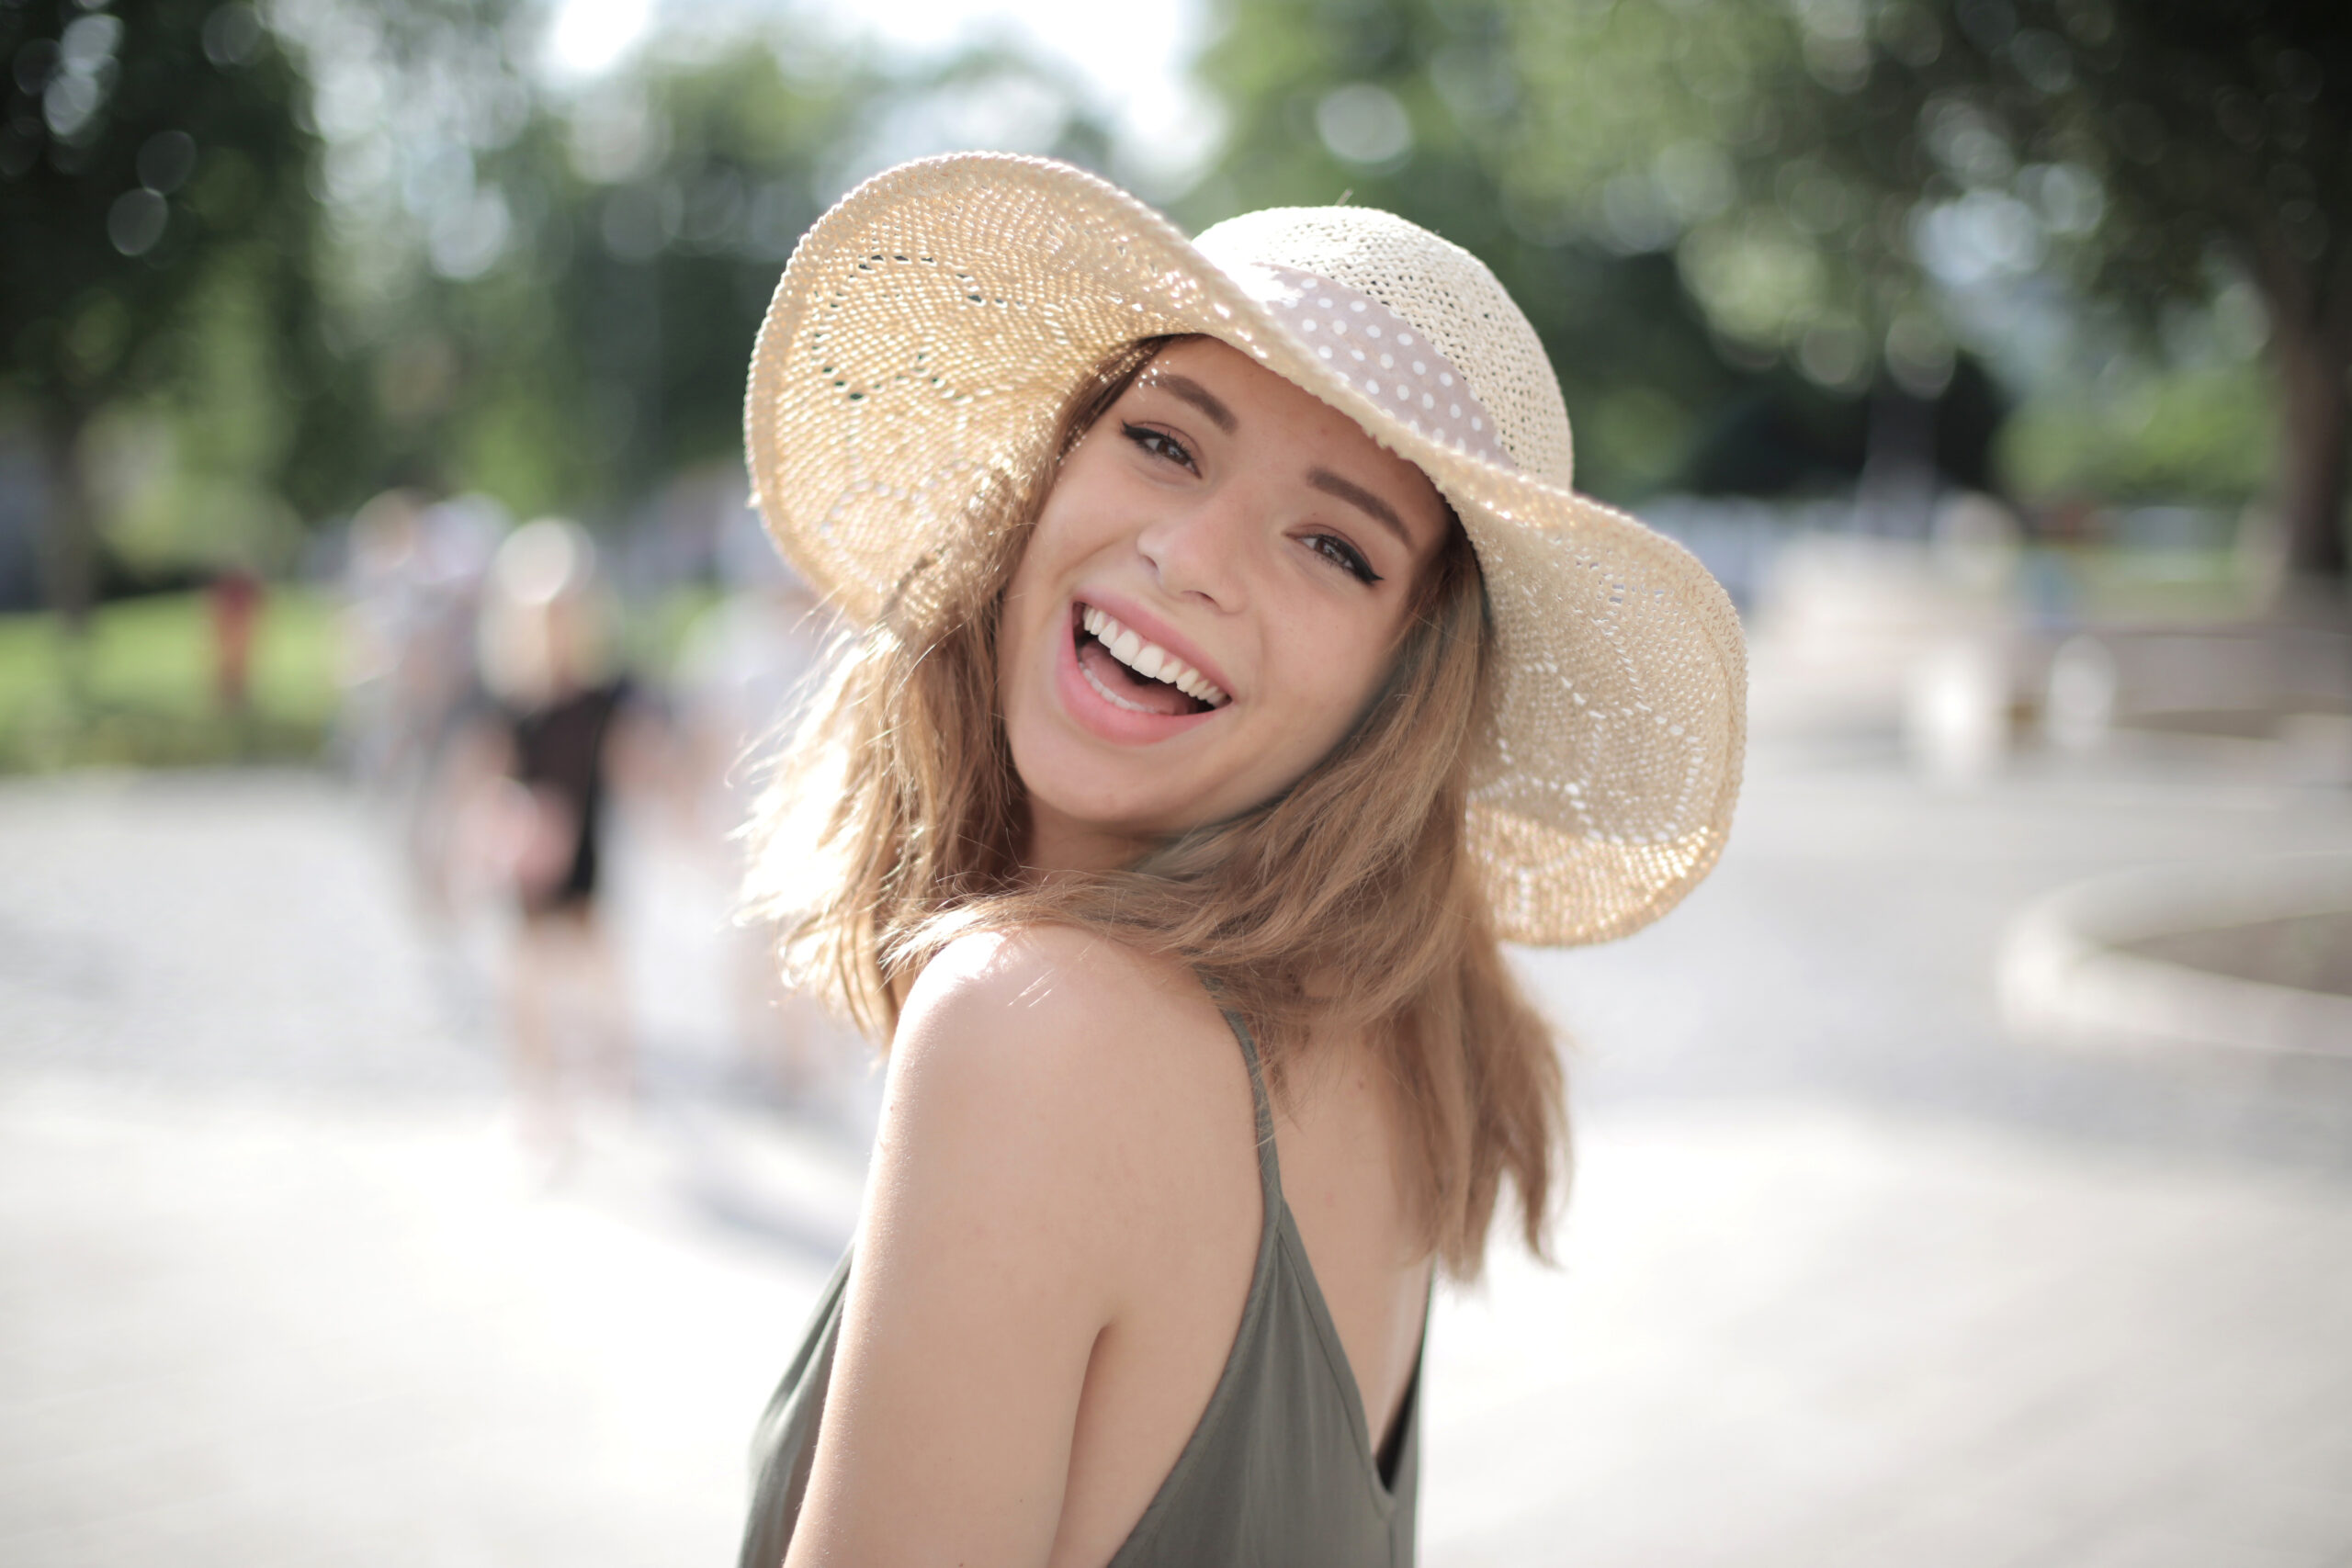 Explore options for a radiant summer smile